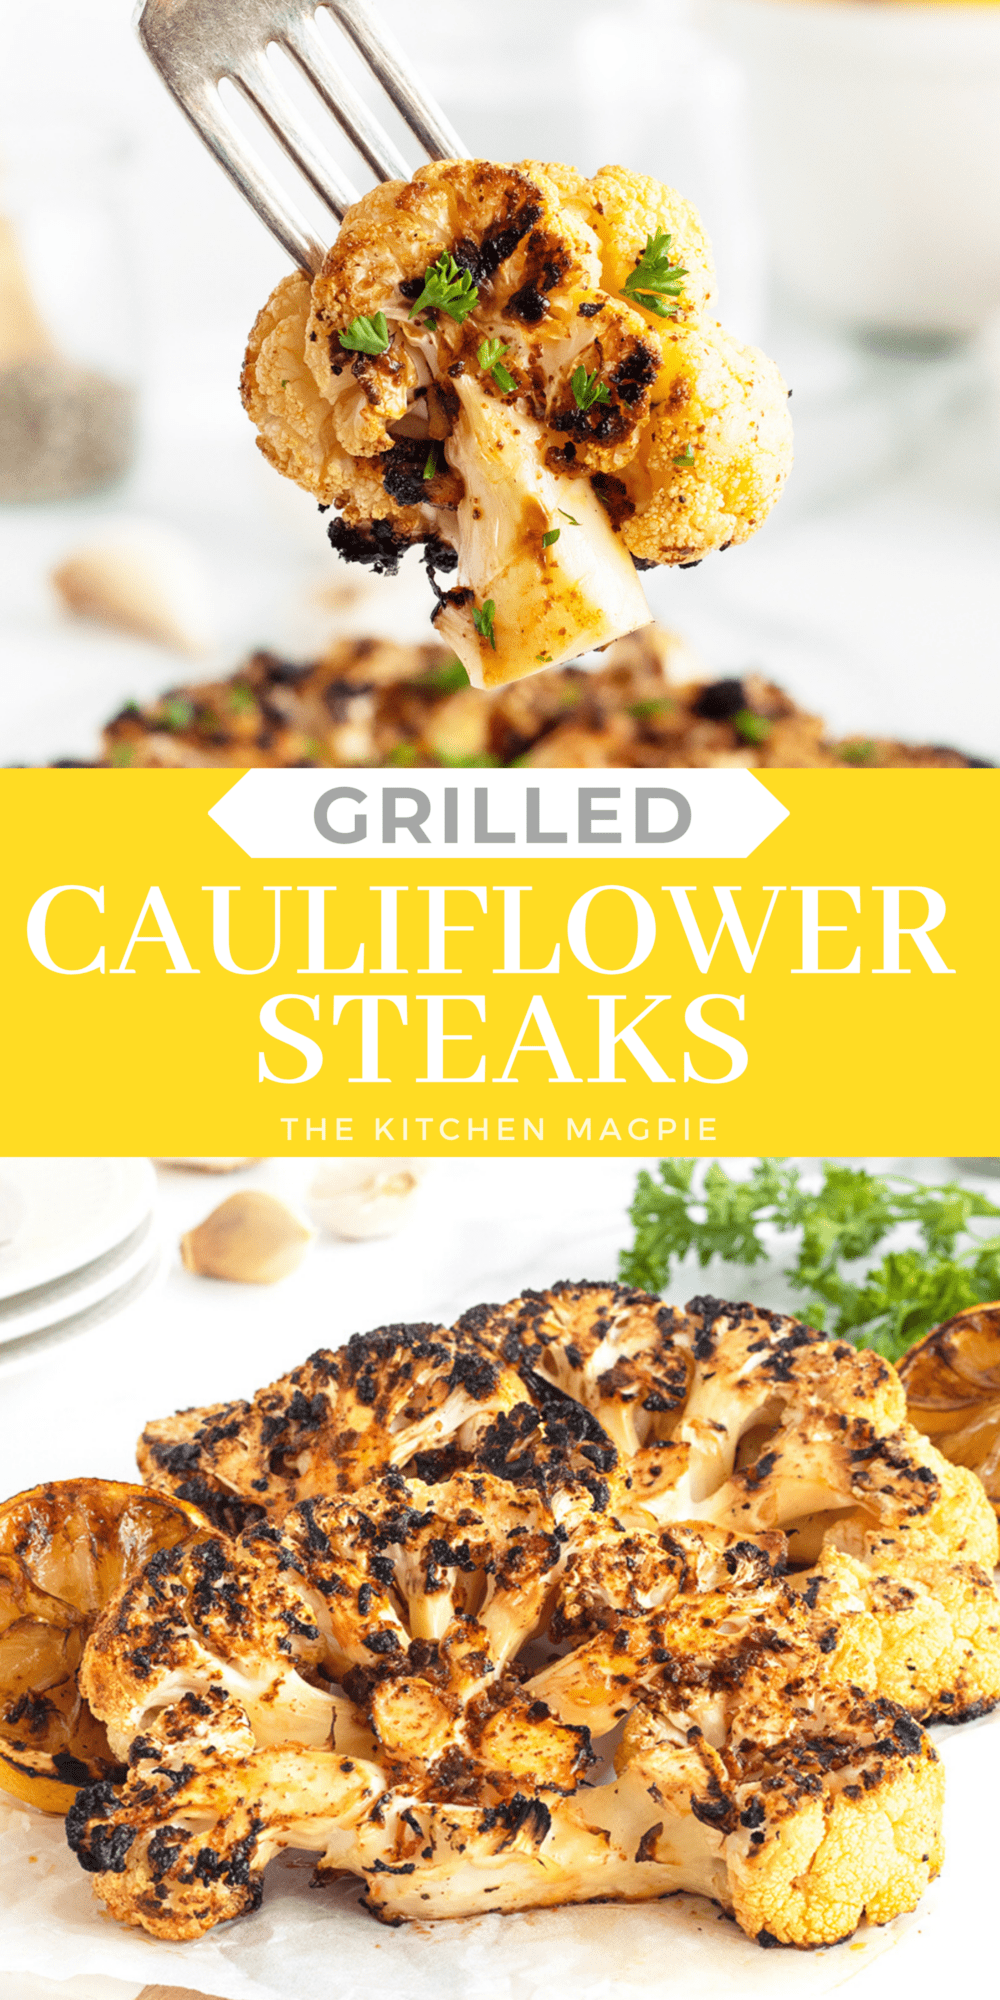 Amp up cauliflower by making it on the grill! Season with garlic, chili powder and lemon, then grill to a wonderful crisp, tender side dish! 